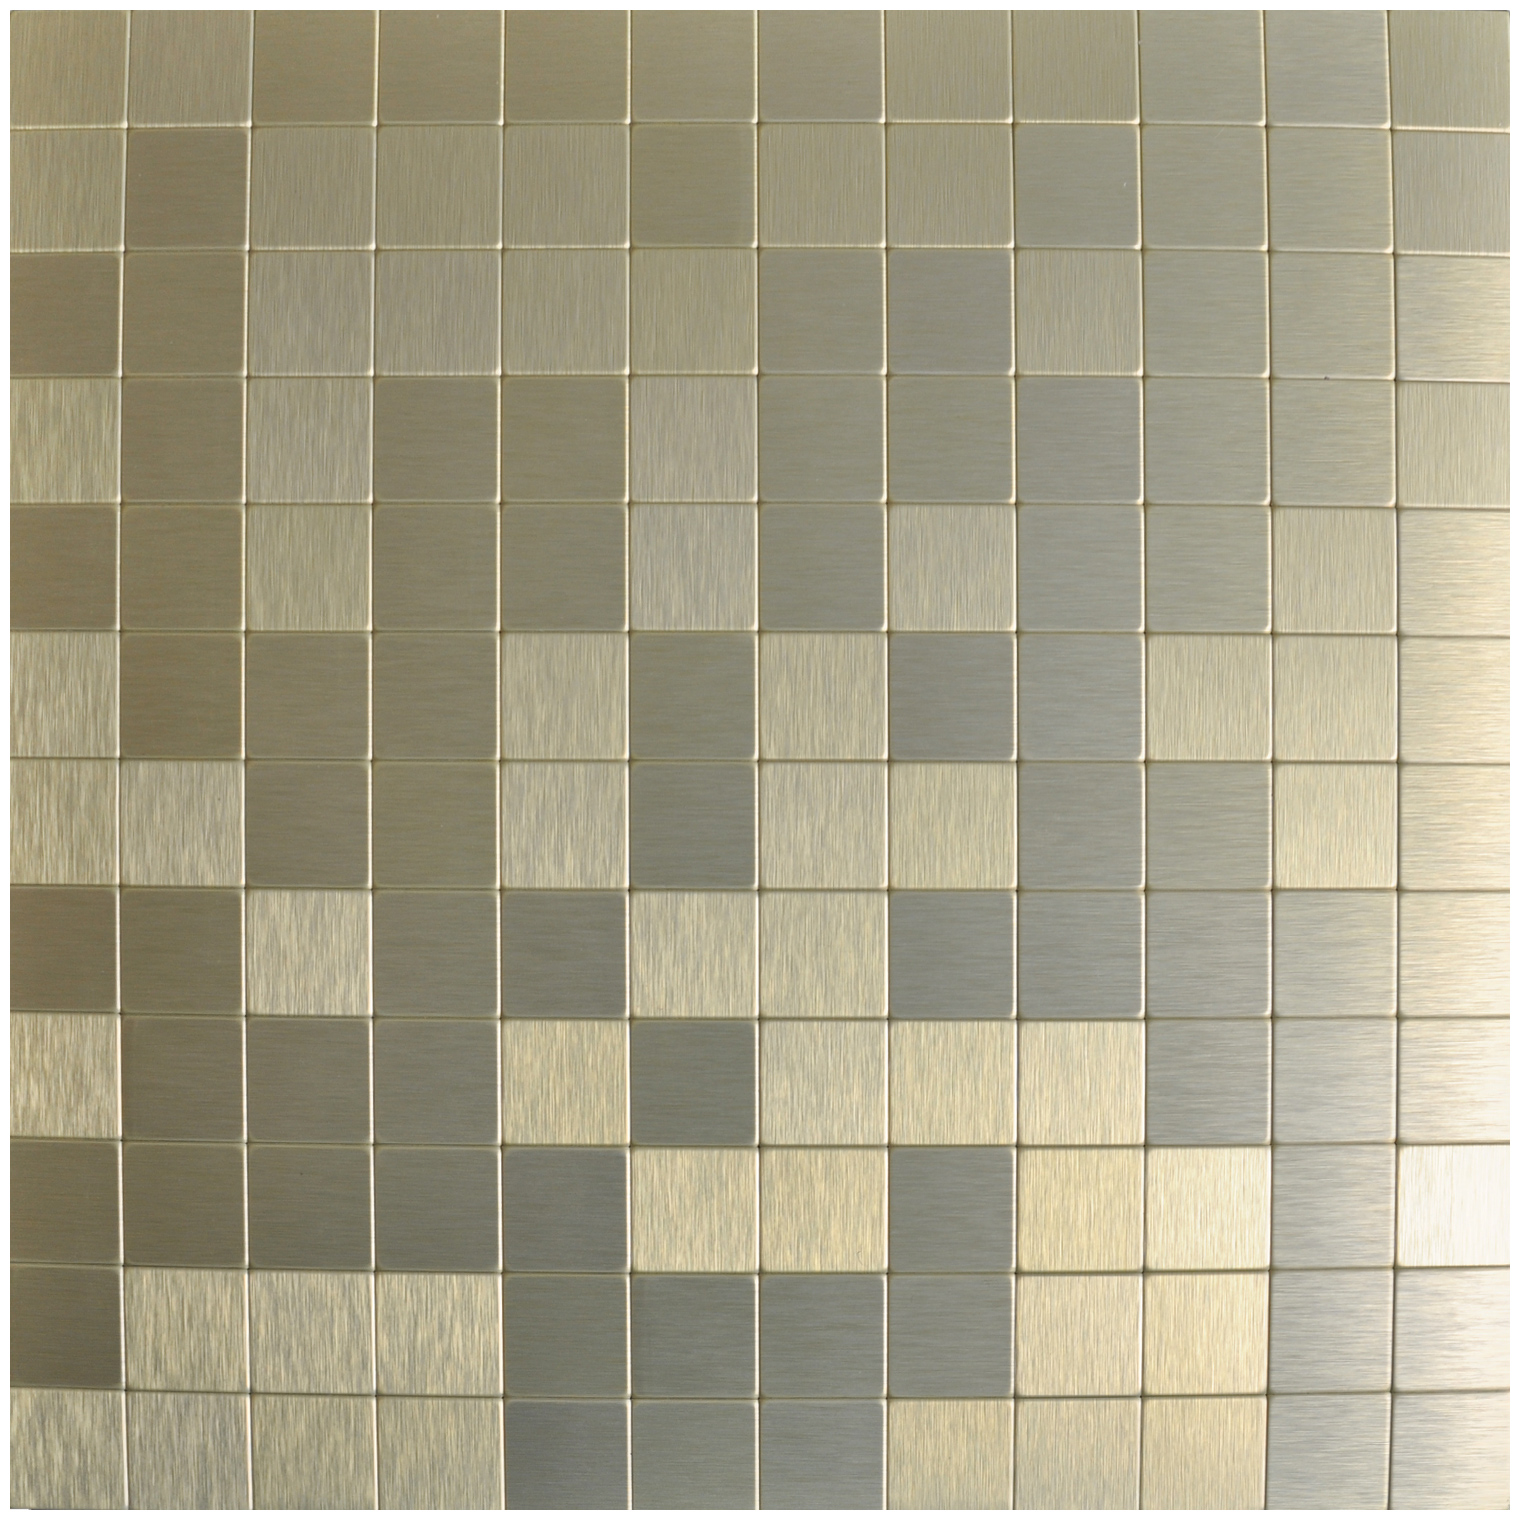 A16012 - Peel N Stick Metal Mosaic 10 Sheets Bronze Square Tiles 12x12In